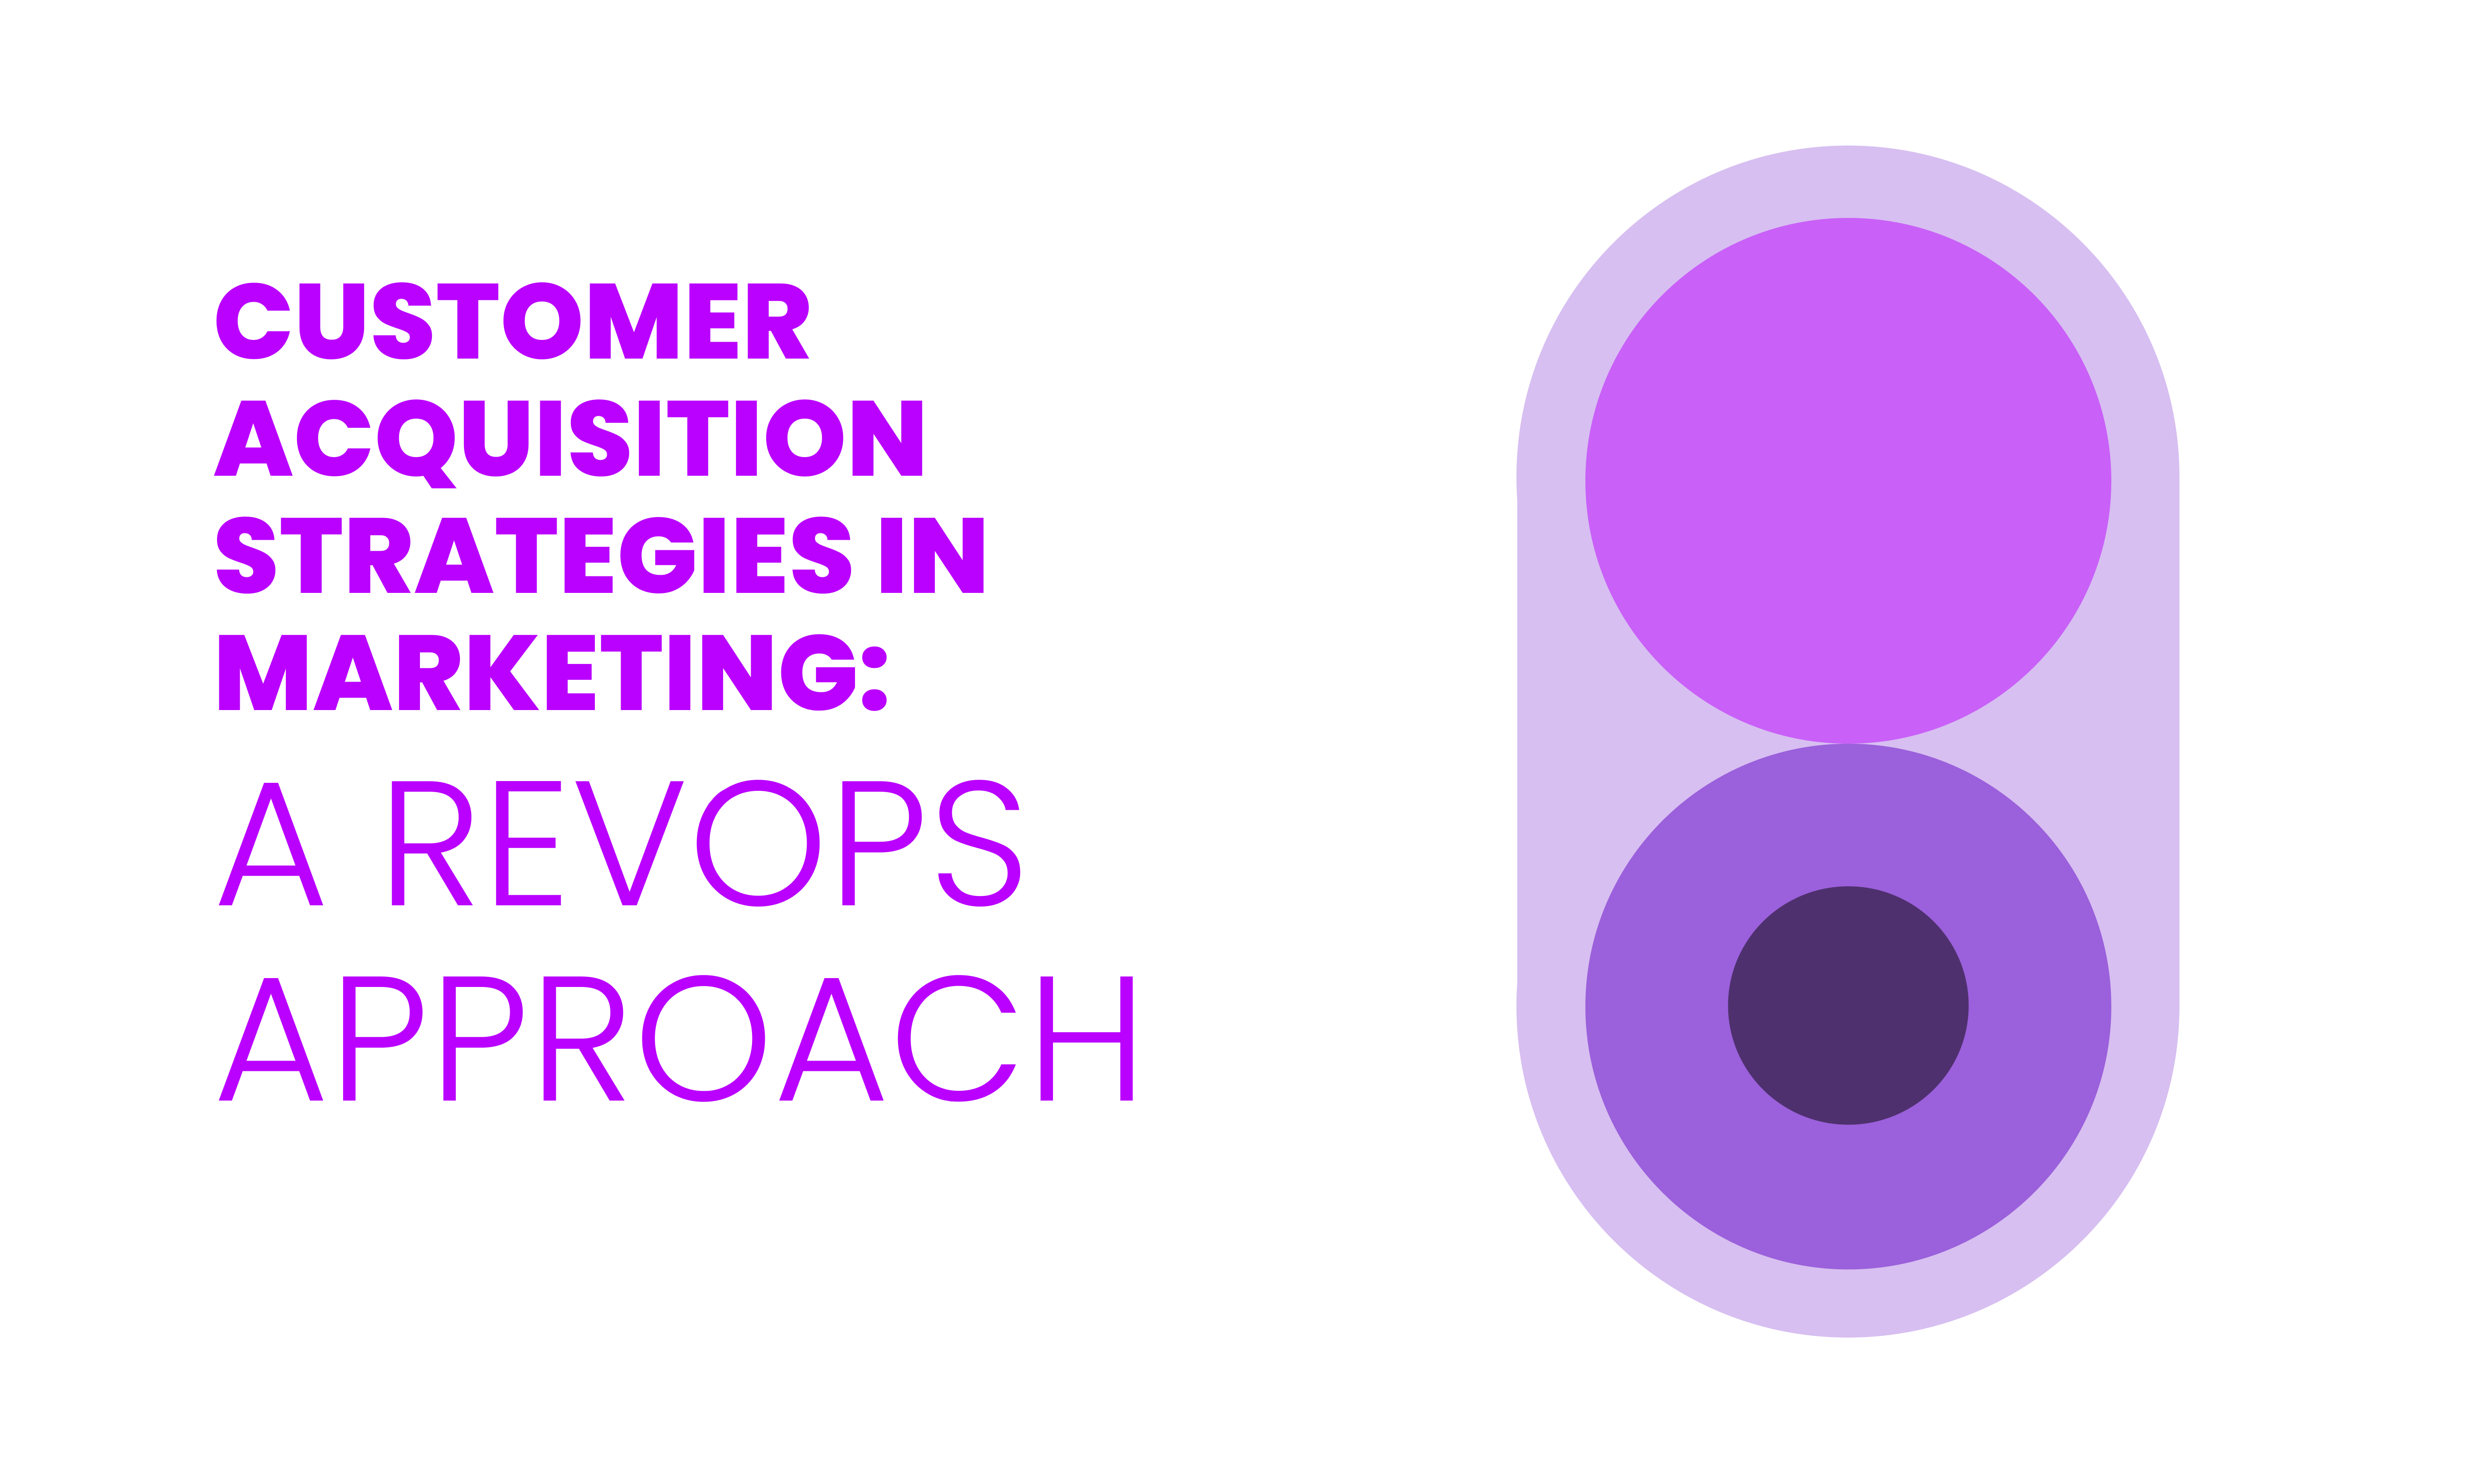 CUSTOMER ACQUISITION STRATEGIES IN MARKETING:  A REVOPS APPROACH